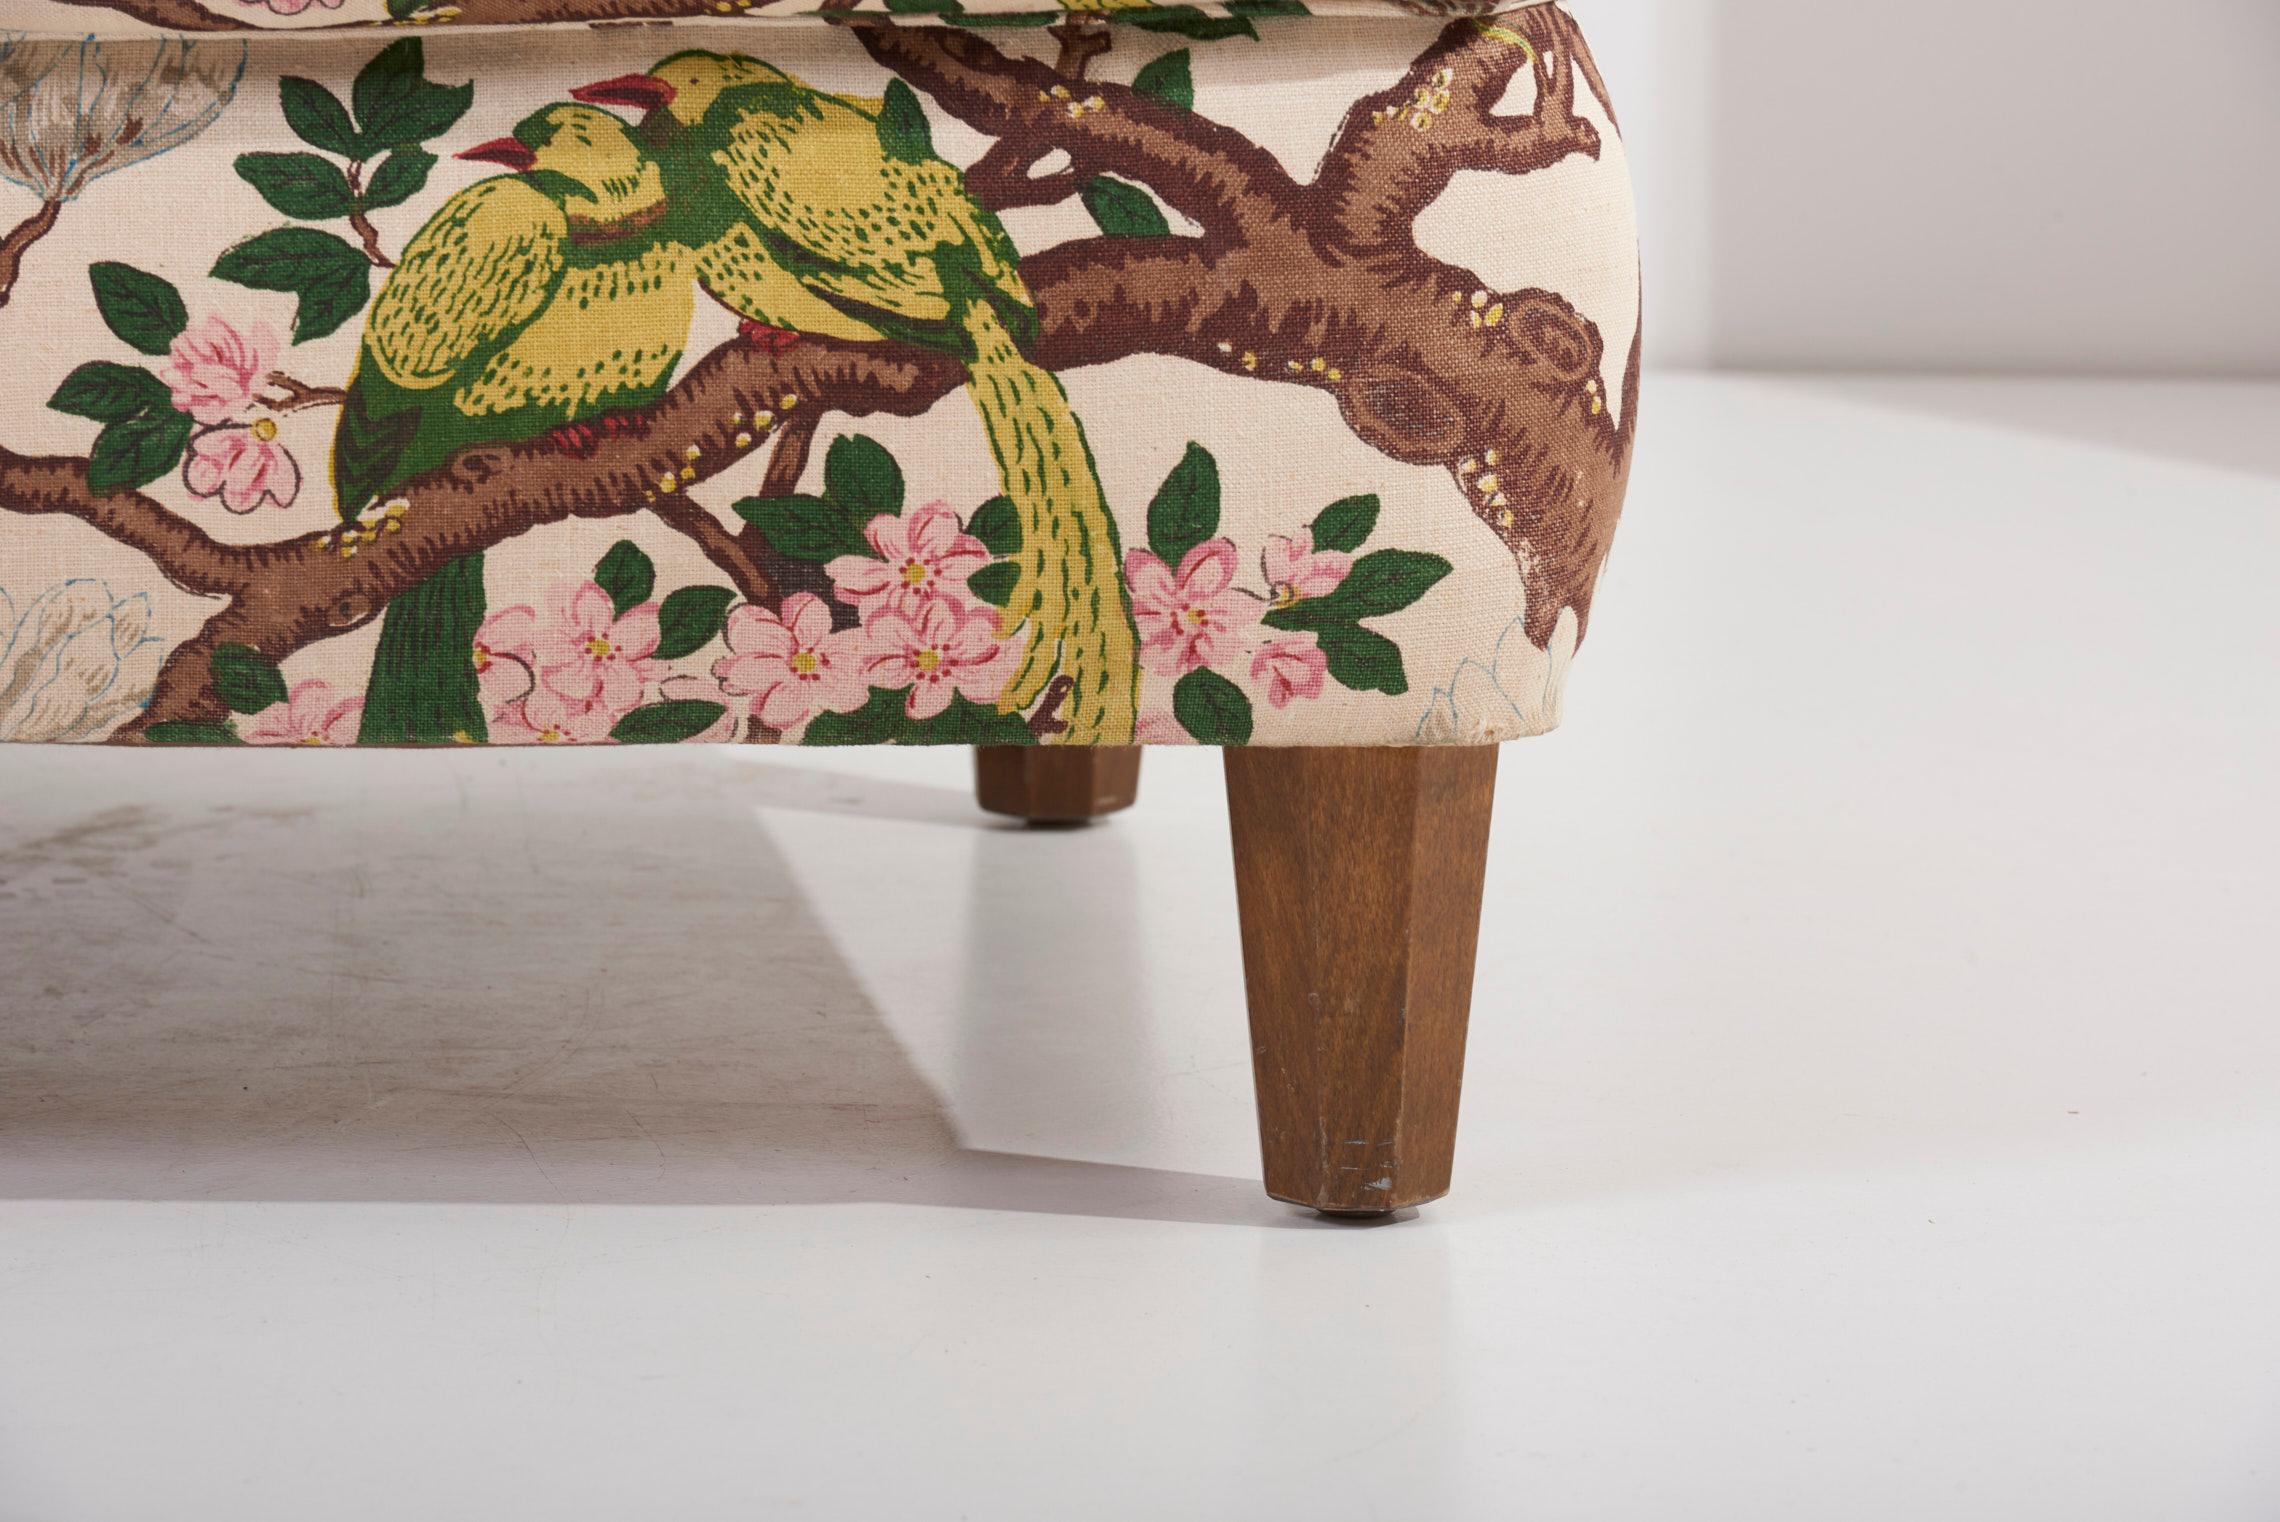 20th Century 4-Seat Sofa with Floral Fabric by Josef Frank for Svenskt Tenn, 1950s